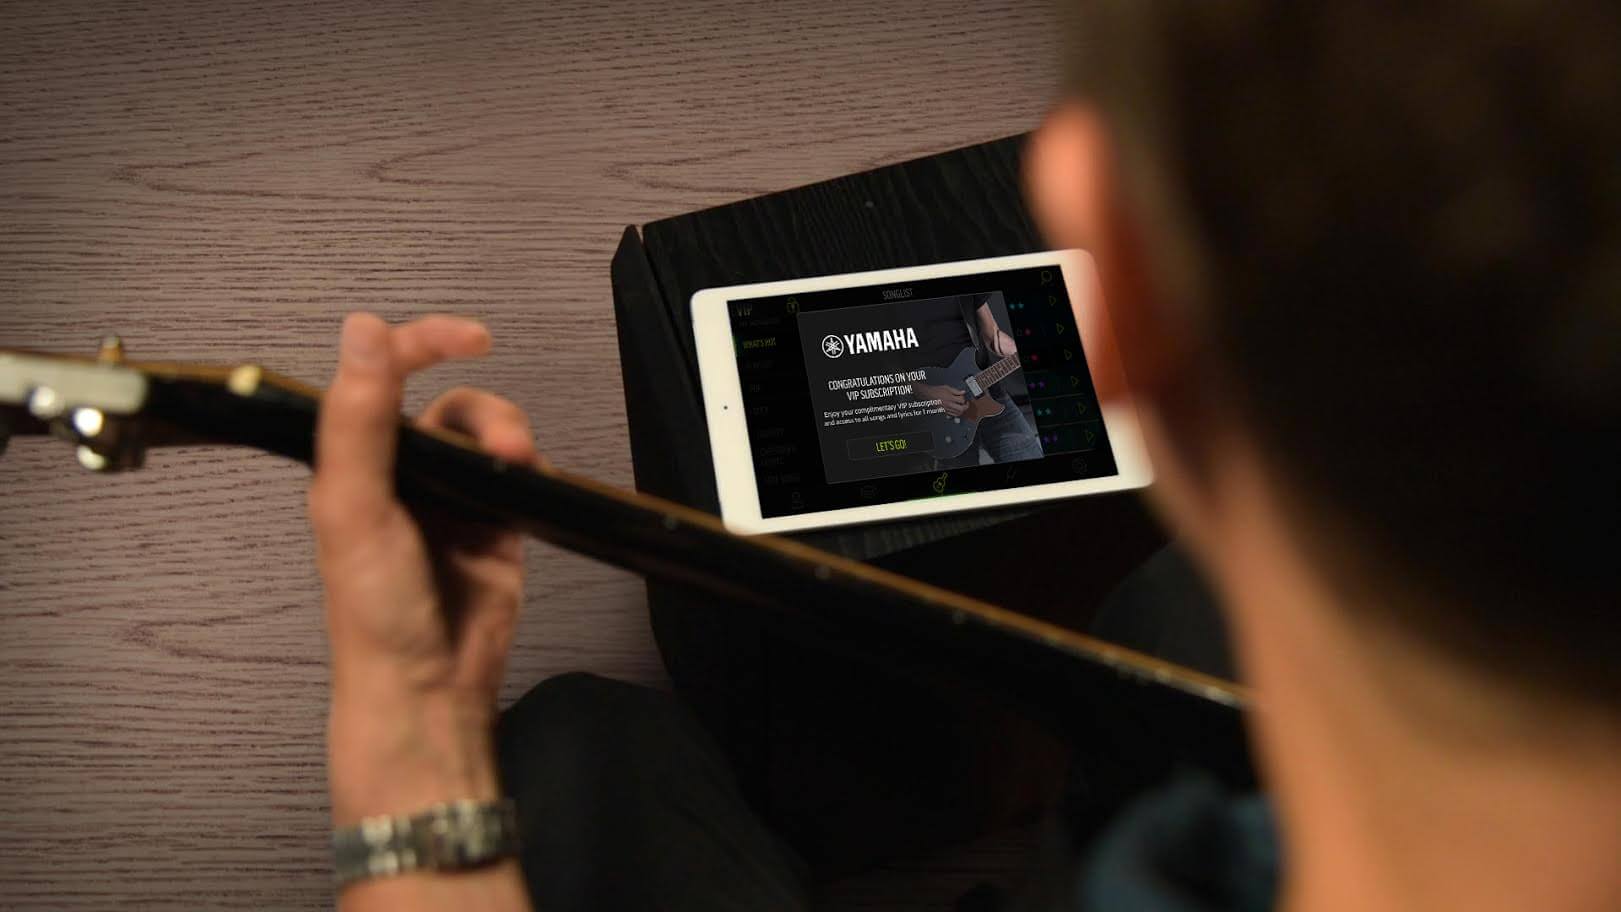 Musopia’s FourChords app will now be included in the Yamaha GigMaker